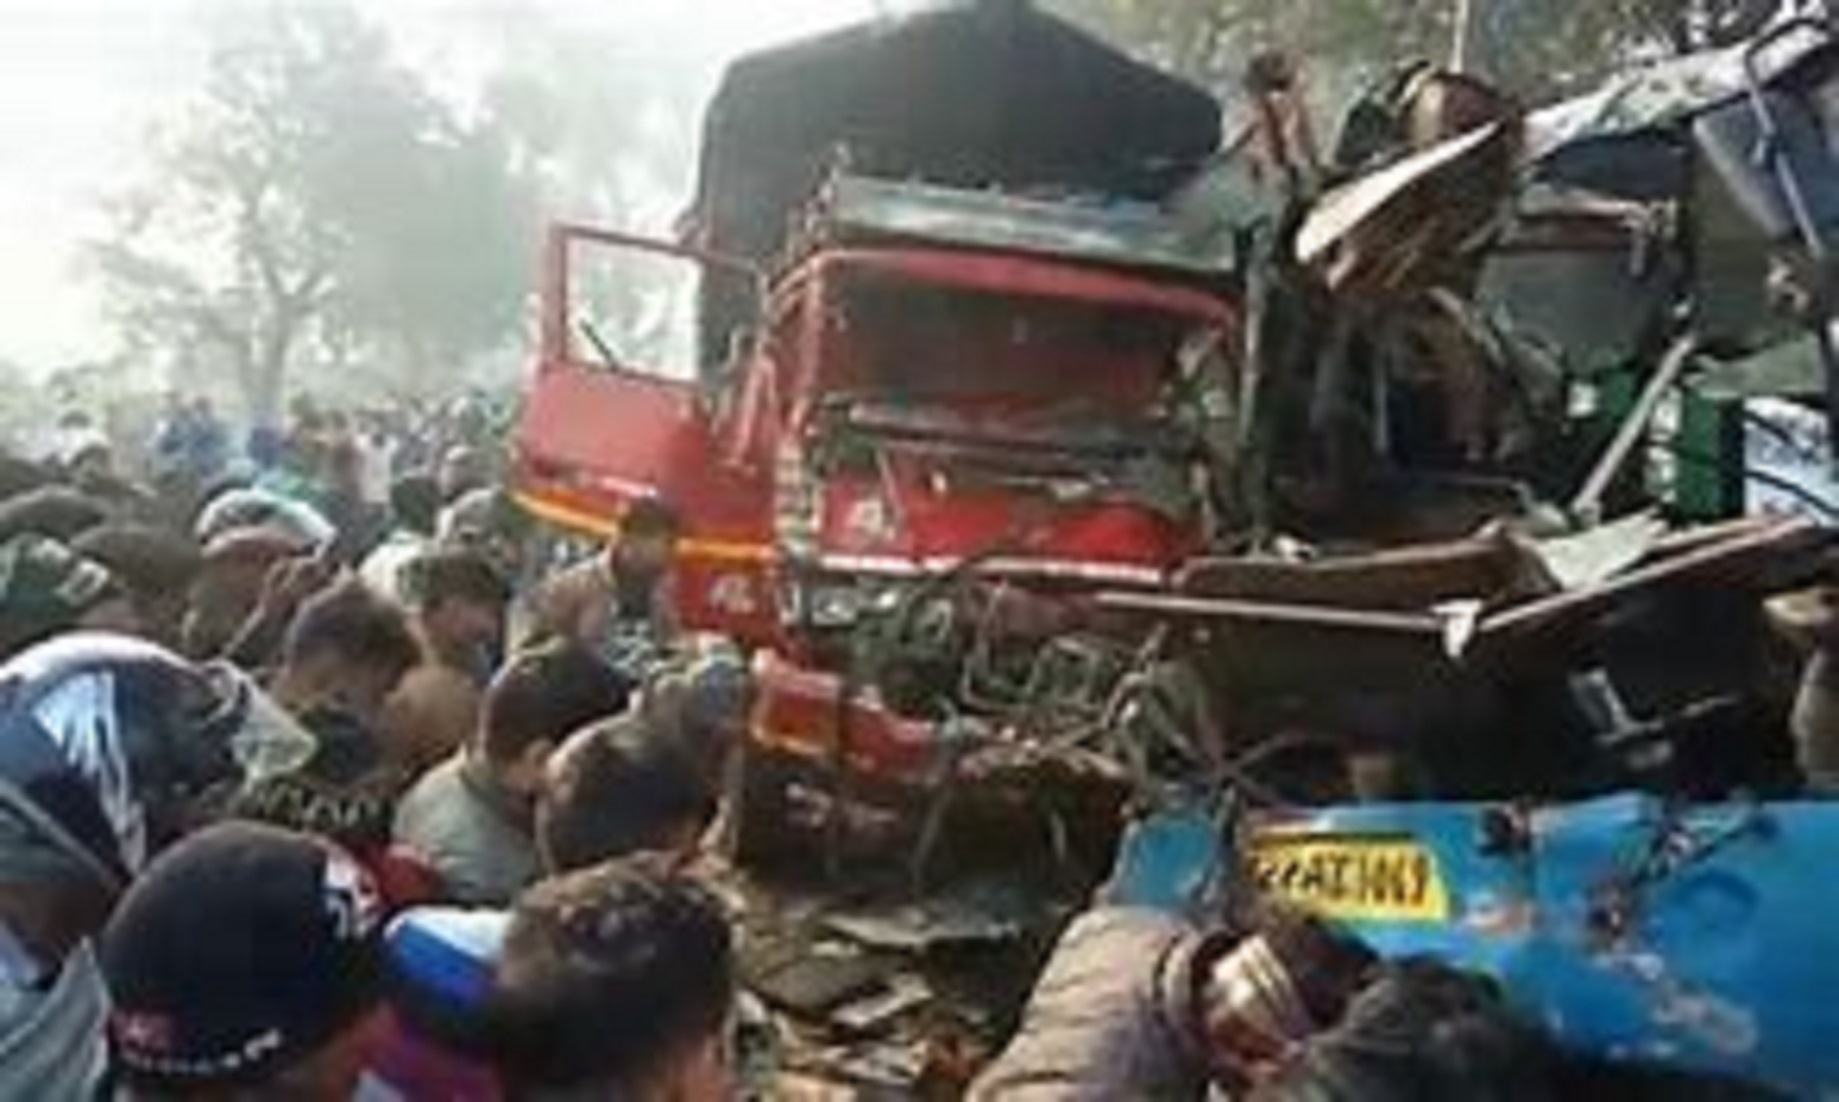 10 Killed In Road Accident In India’s Assam